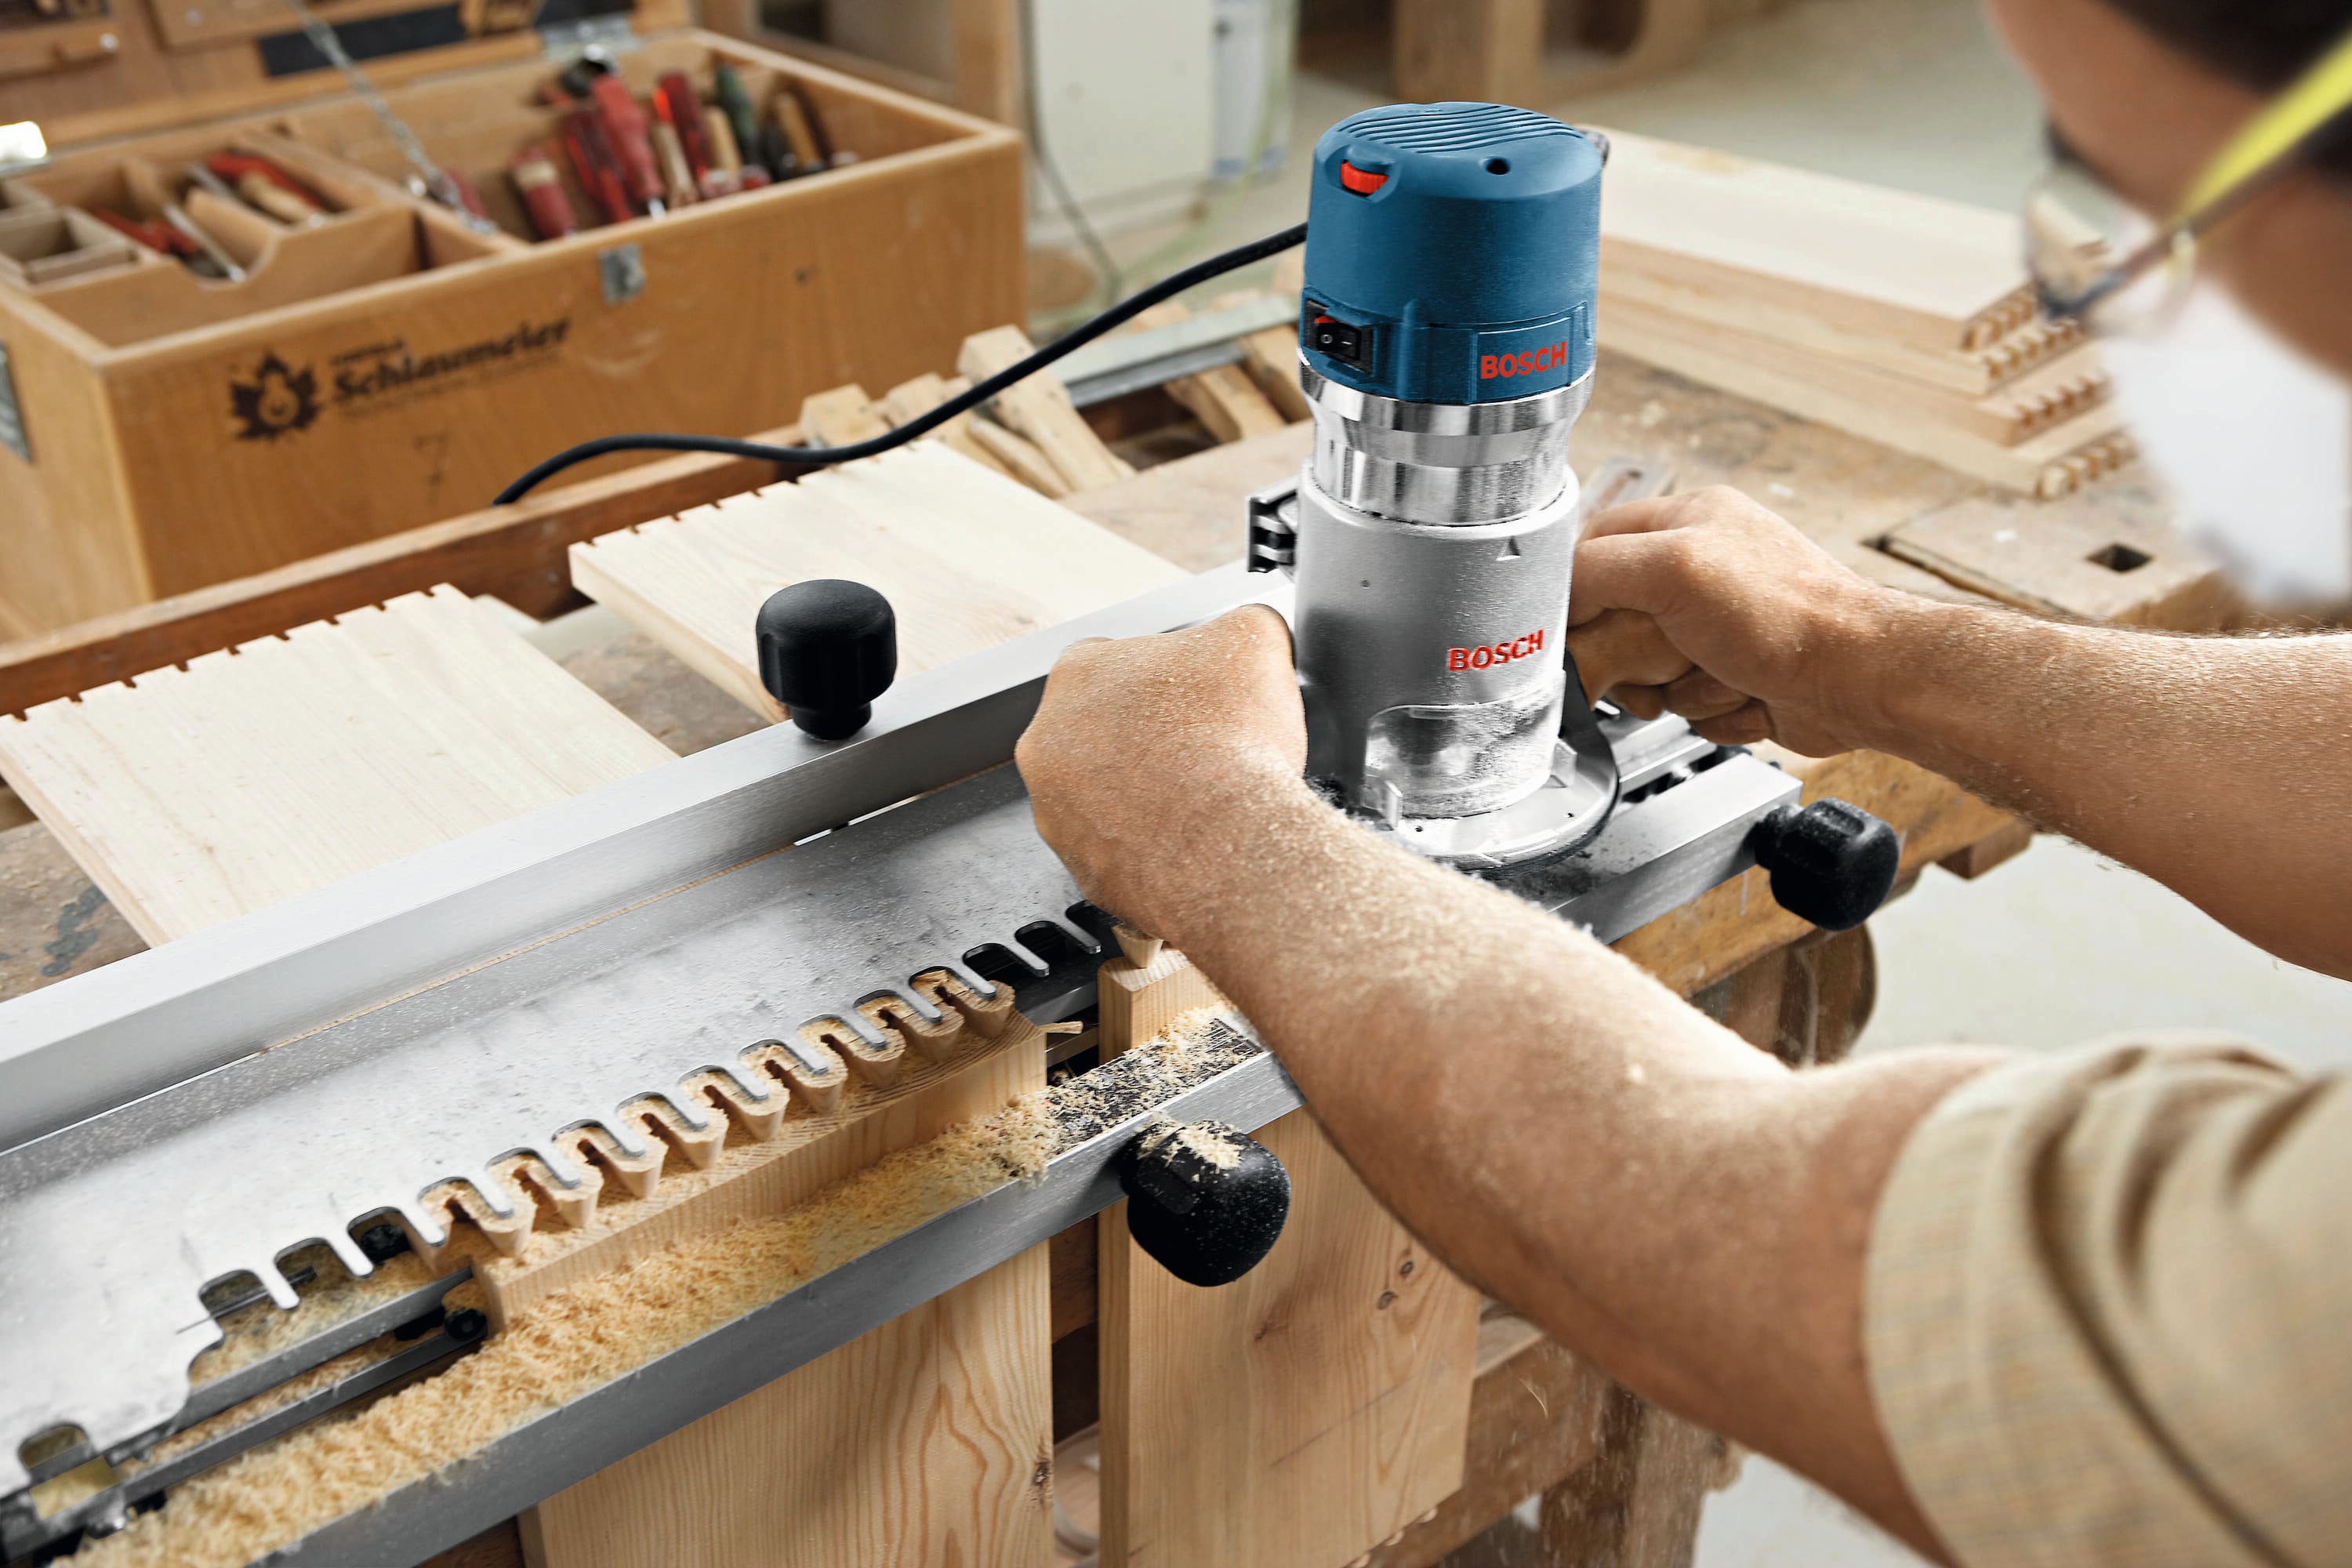 Bosch - 2.25 HP Combination Plunge- and Fixed-Base Router - Model: 161 –  Professional Grinding Inc